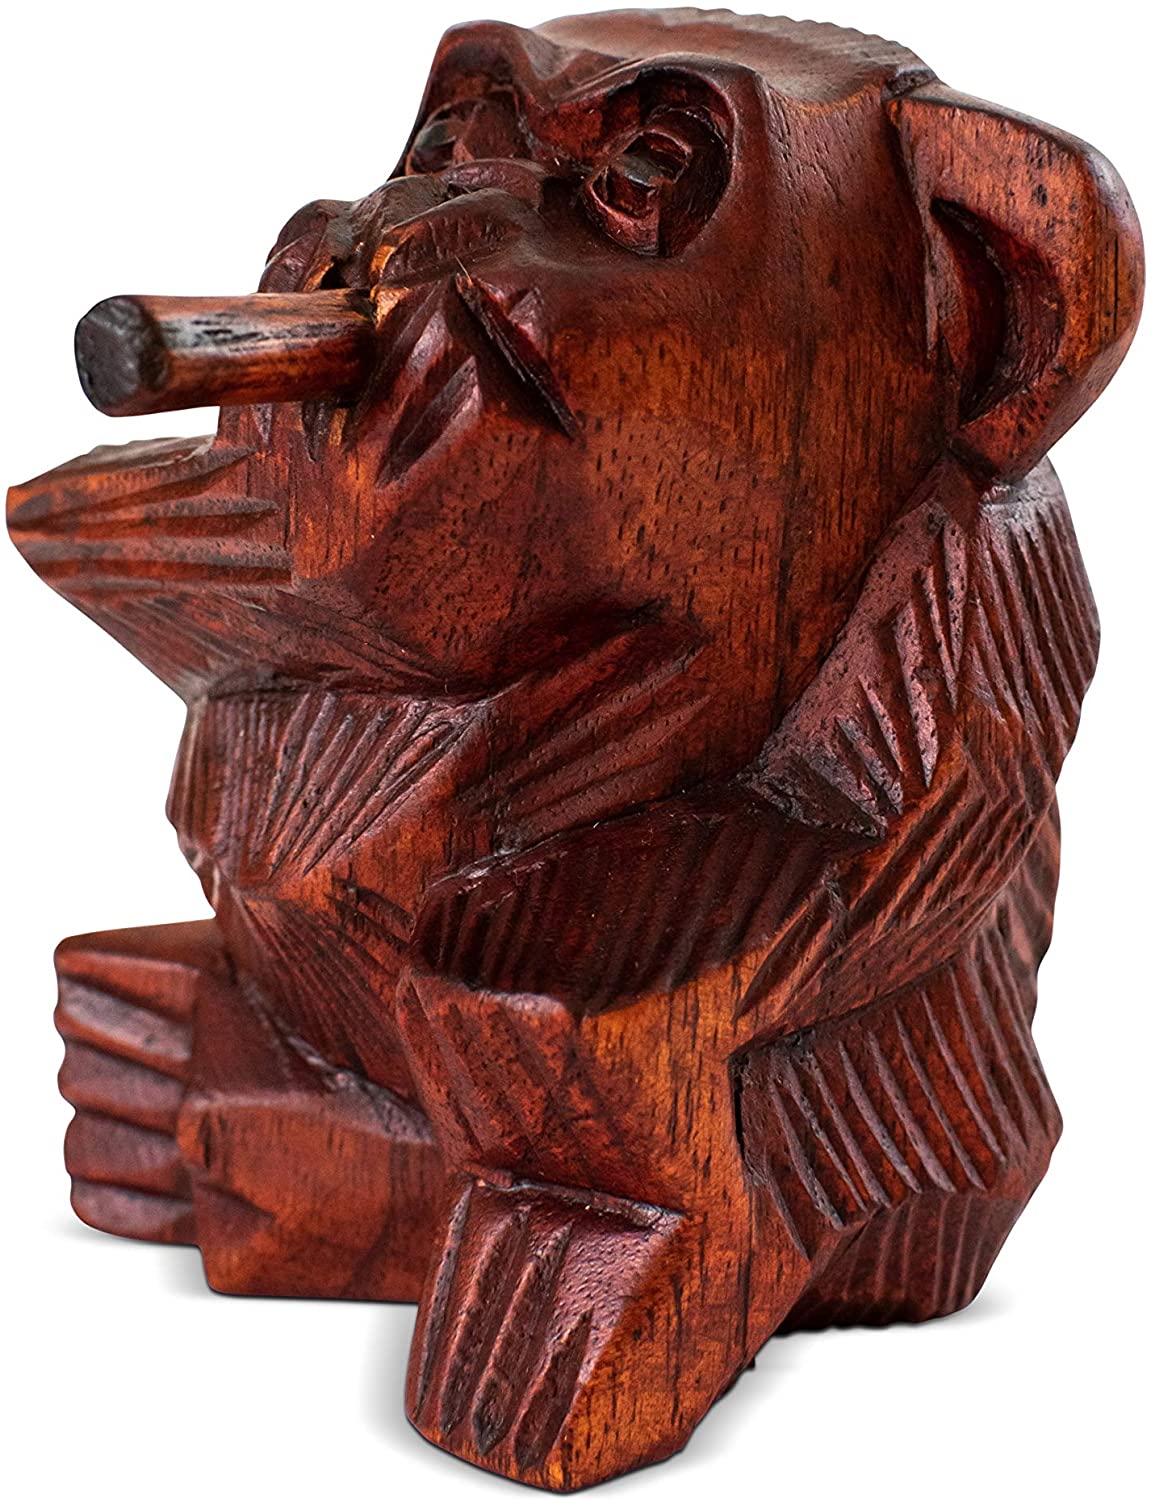 Wooden Hand Carved Smoking Monkey Statue Figurine Handmade Art Rustic Sculpture Decorative Home Decor Accent Handcrafted Wood Decoration